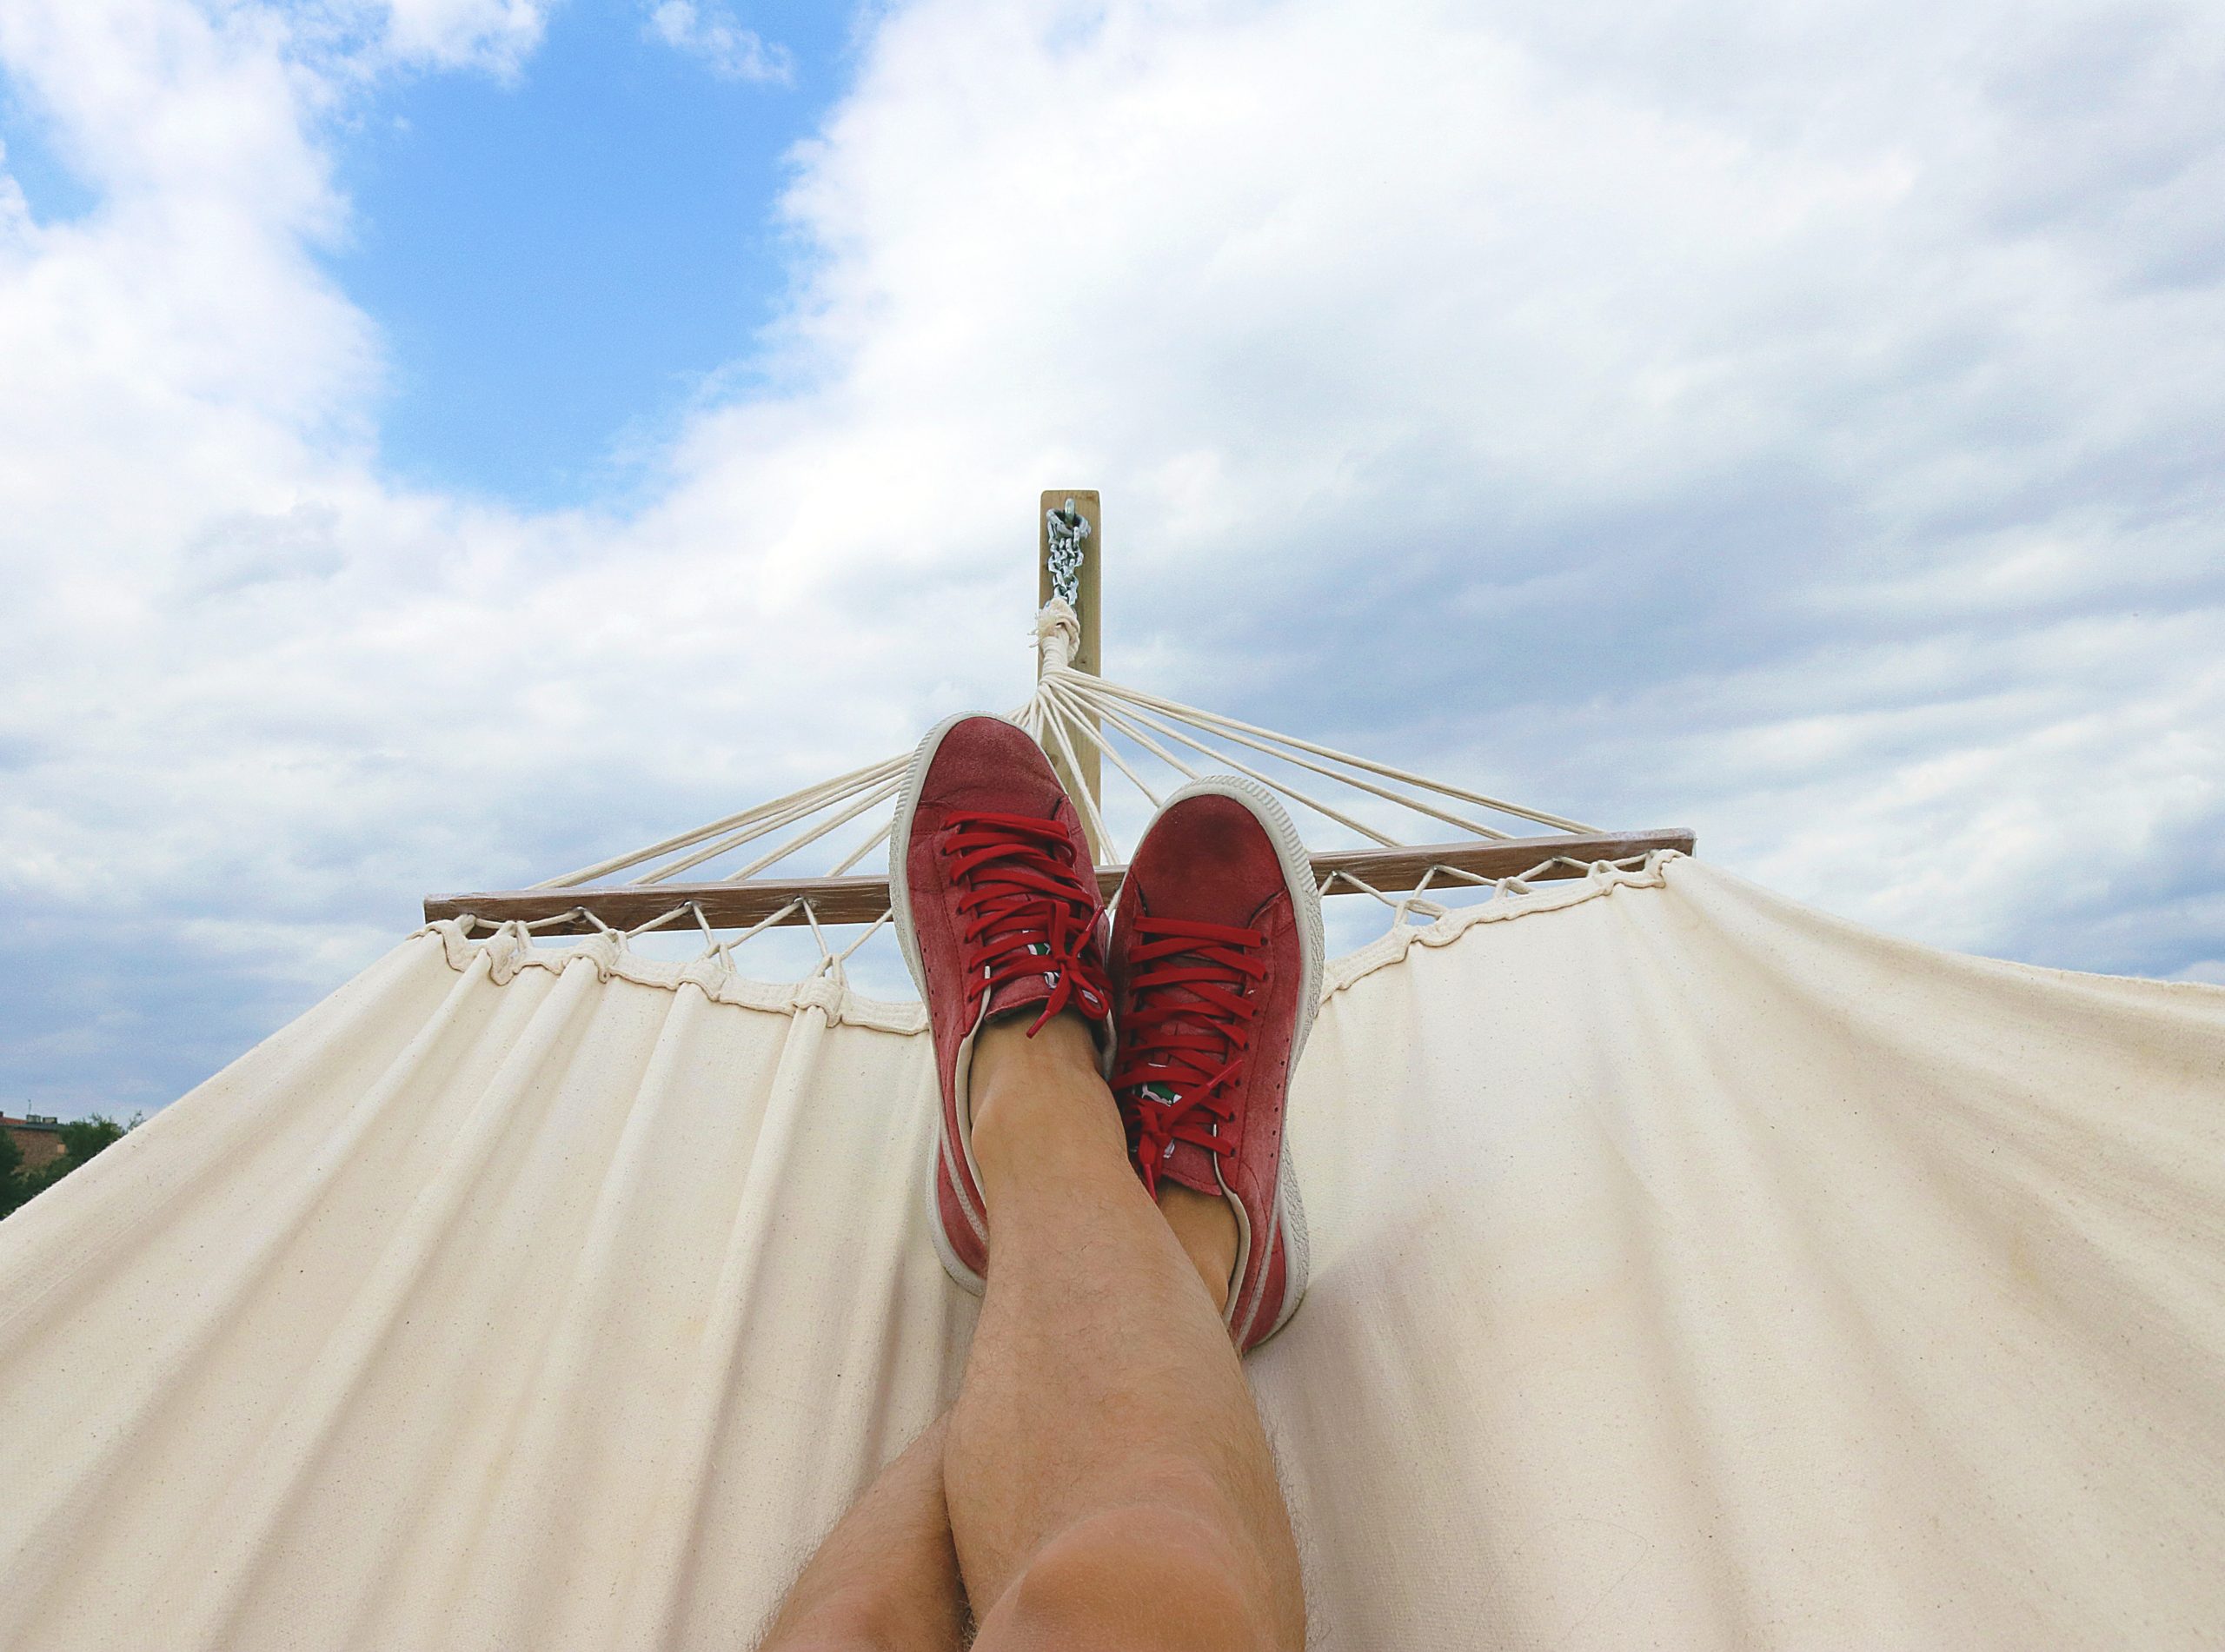 legs and feet with red shoes laying in a hammock with blue skies in the background